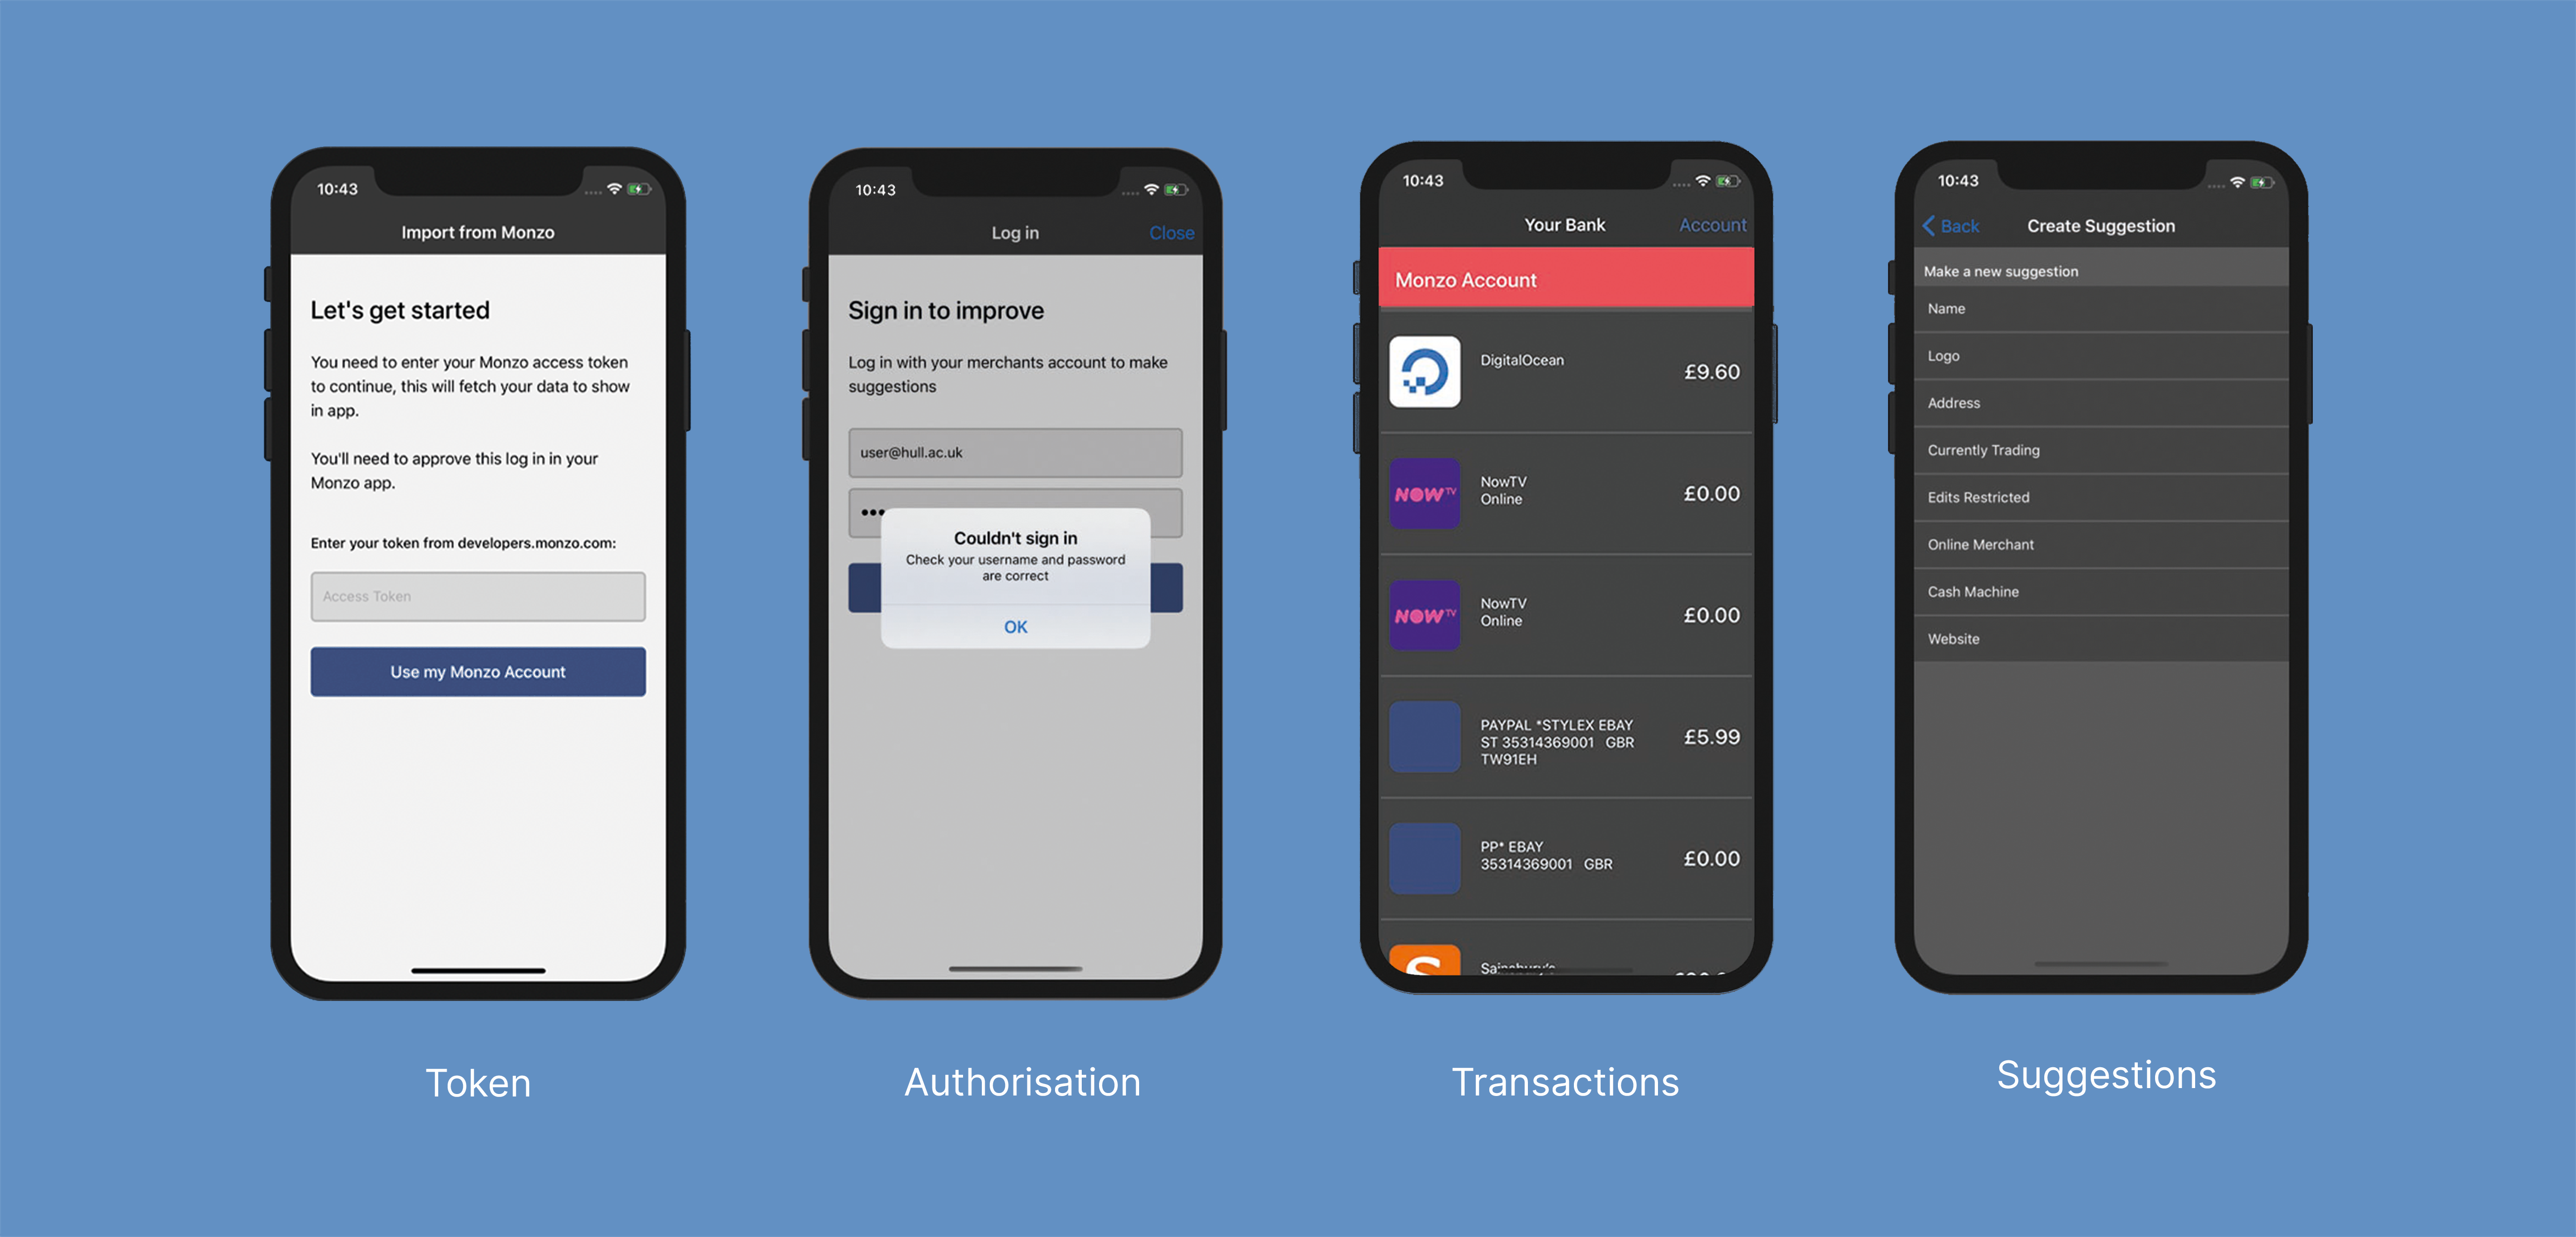 Screens from the mobile app showing token, authorisation, transaction and suggestions